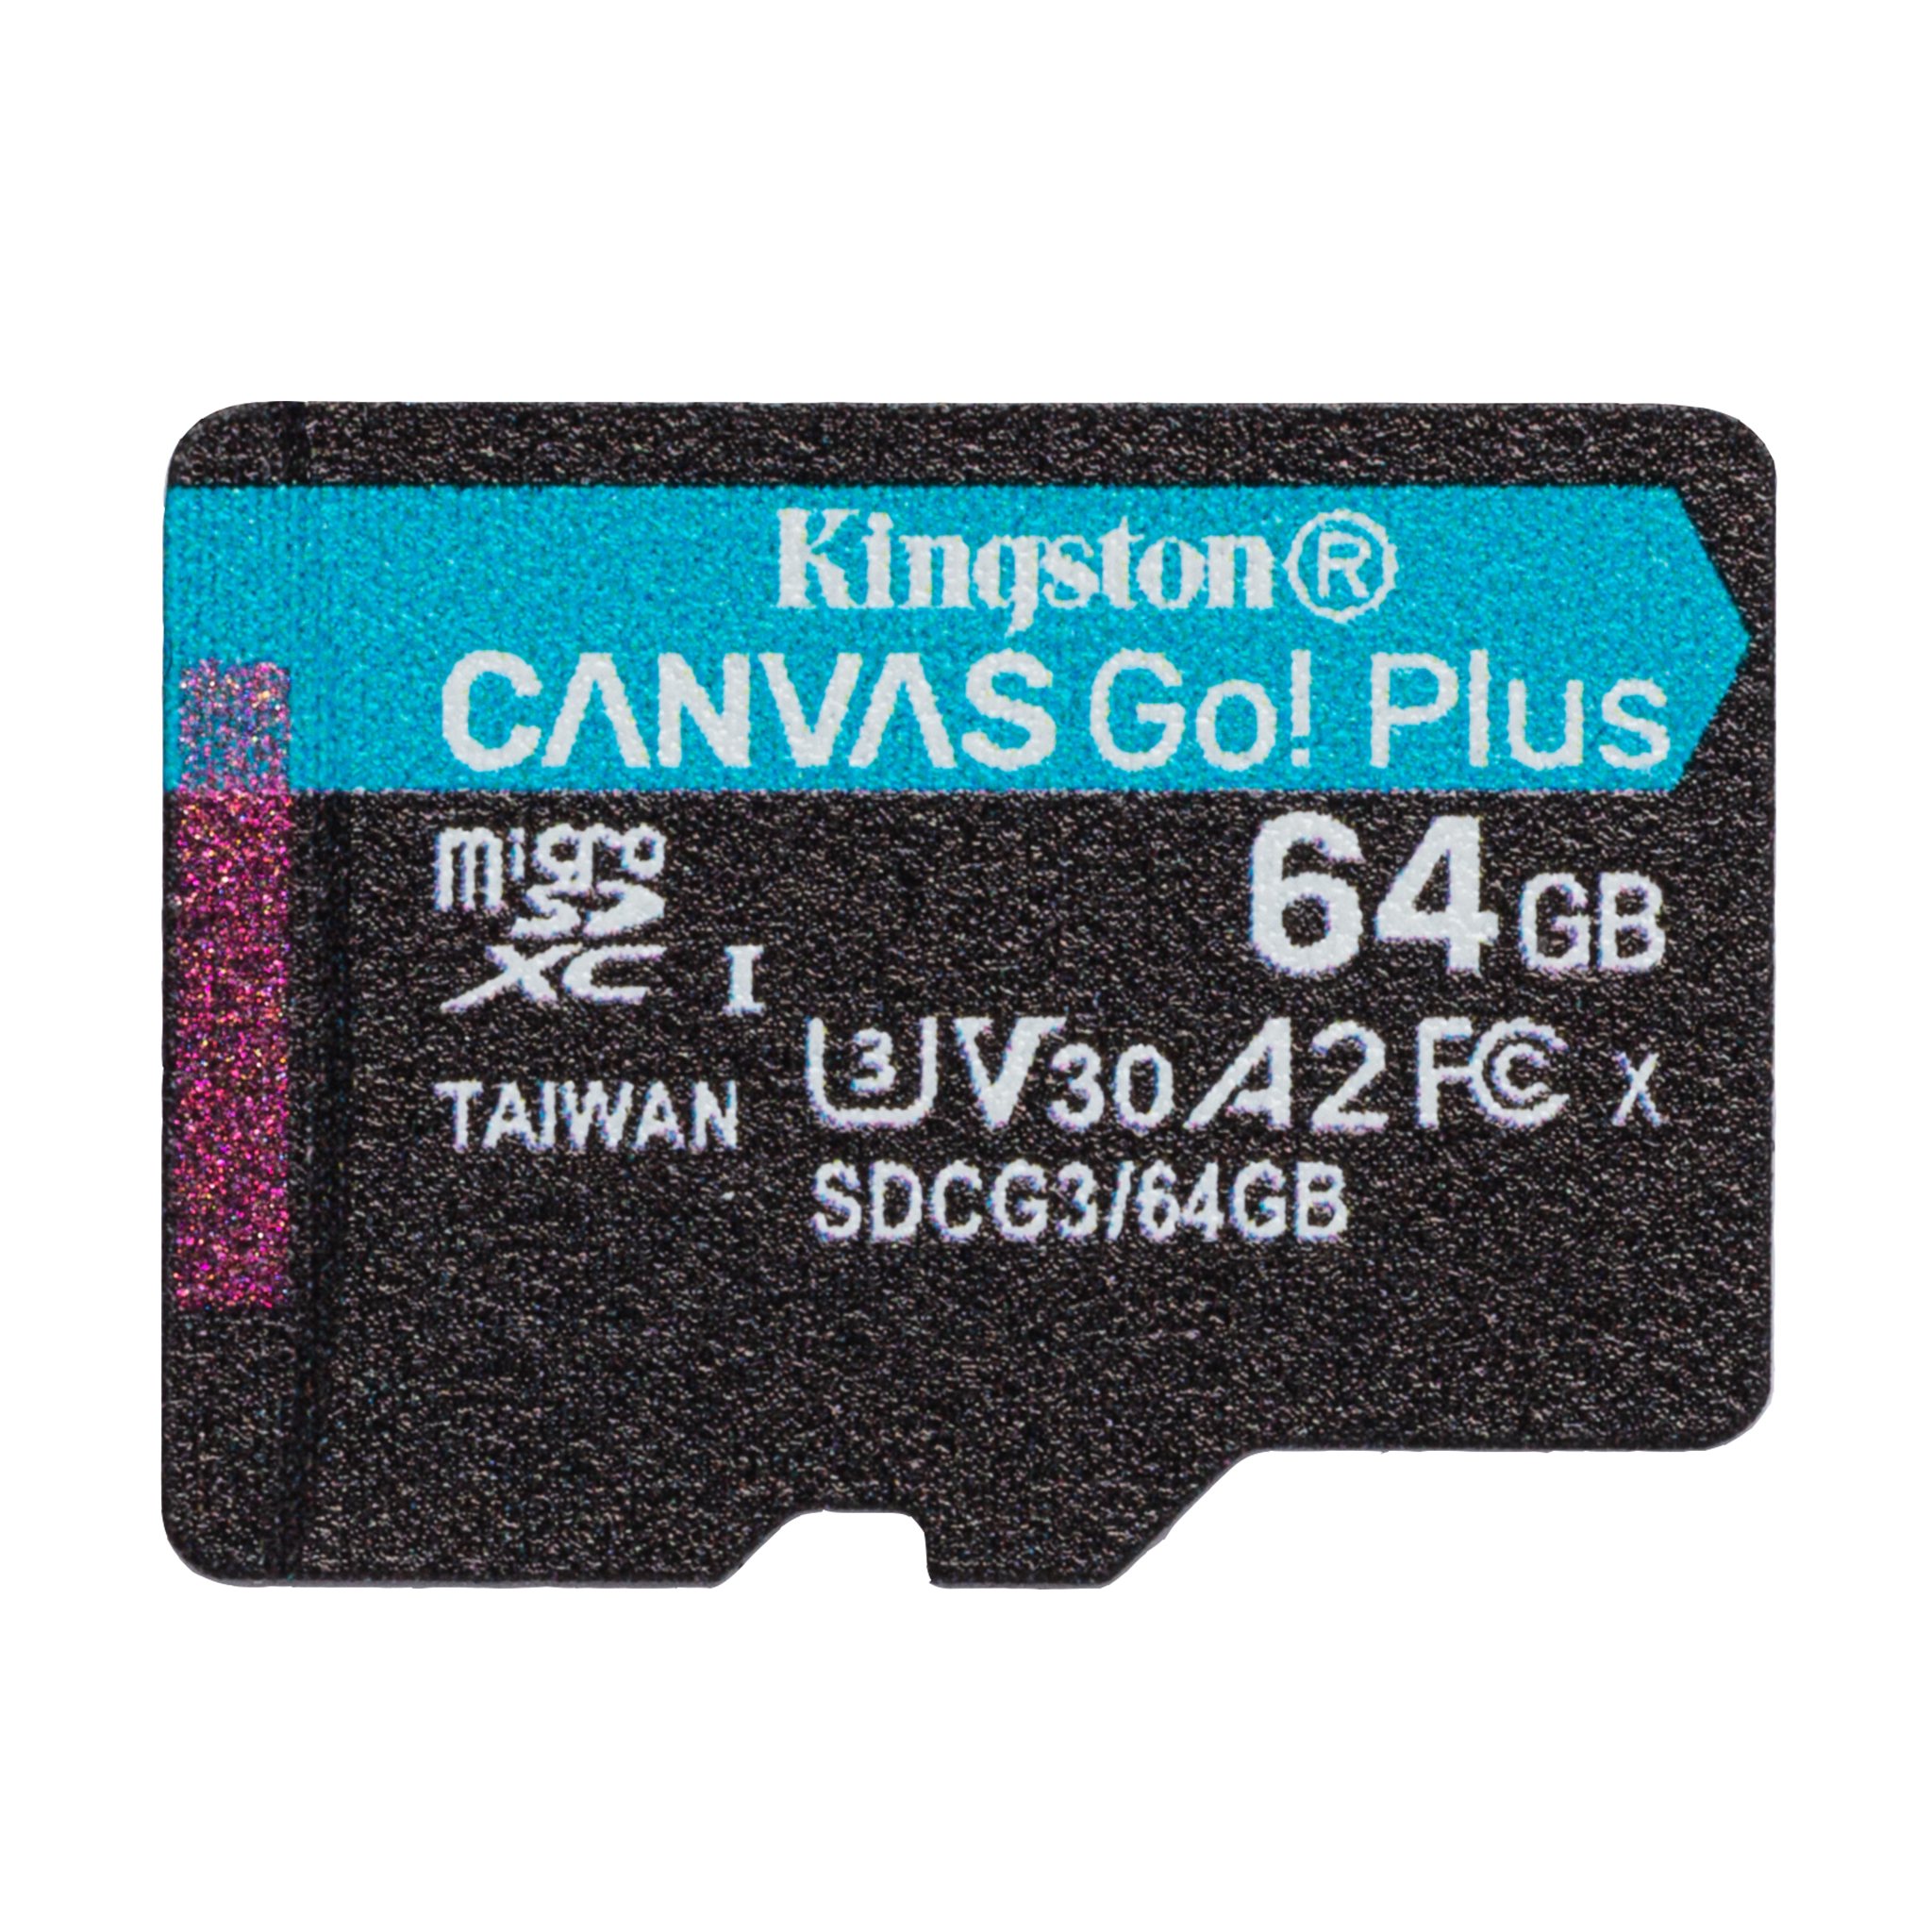 100MBs Works with Kingston Kingston 64GB LG L Prime MicroSDXC Canvas Select Plus Card Verified by SanFlash.